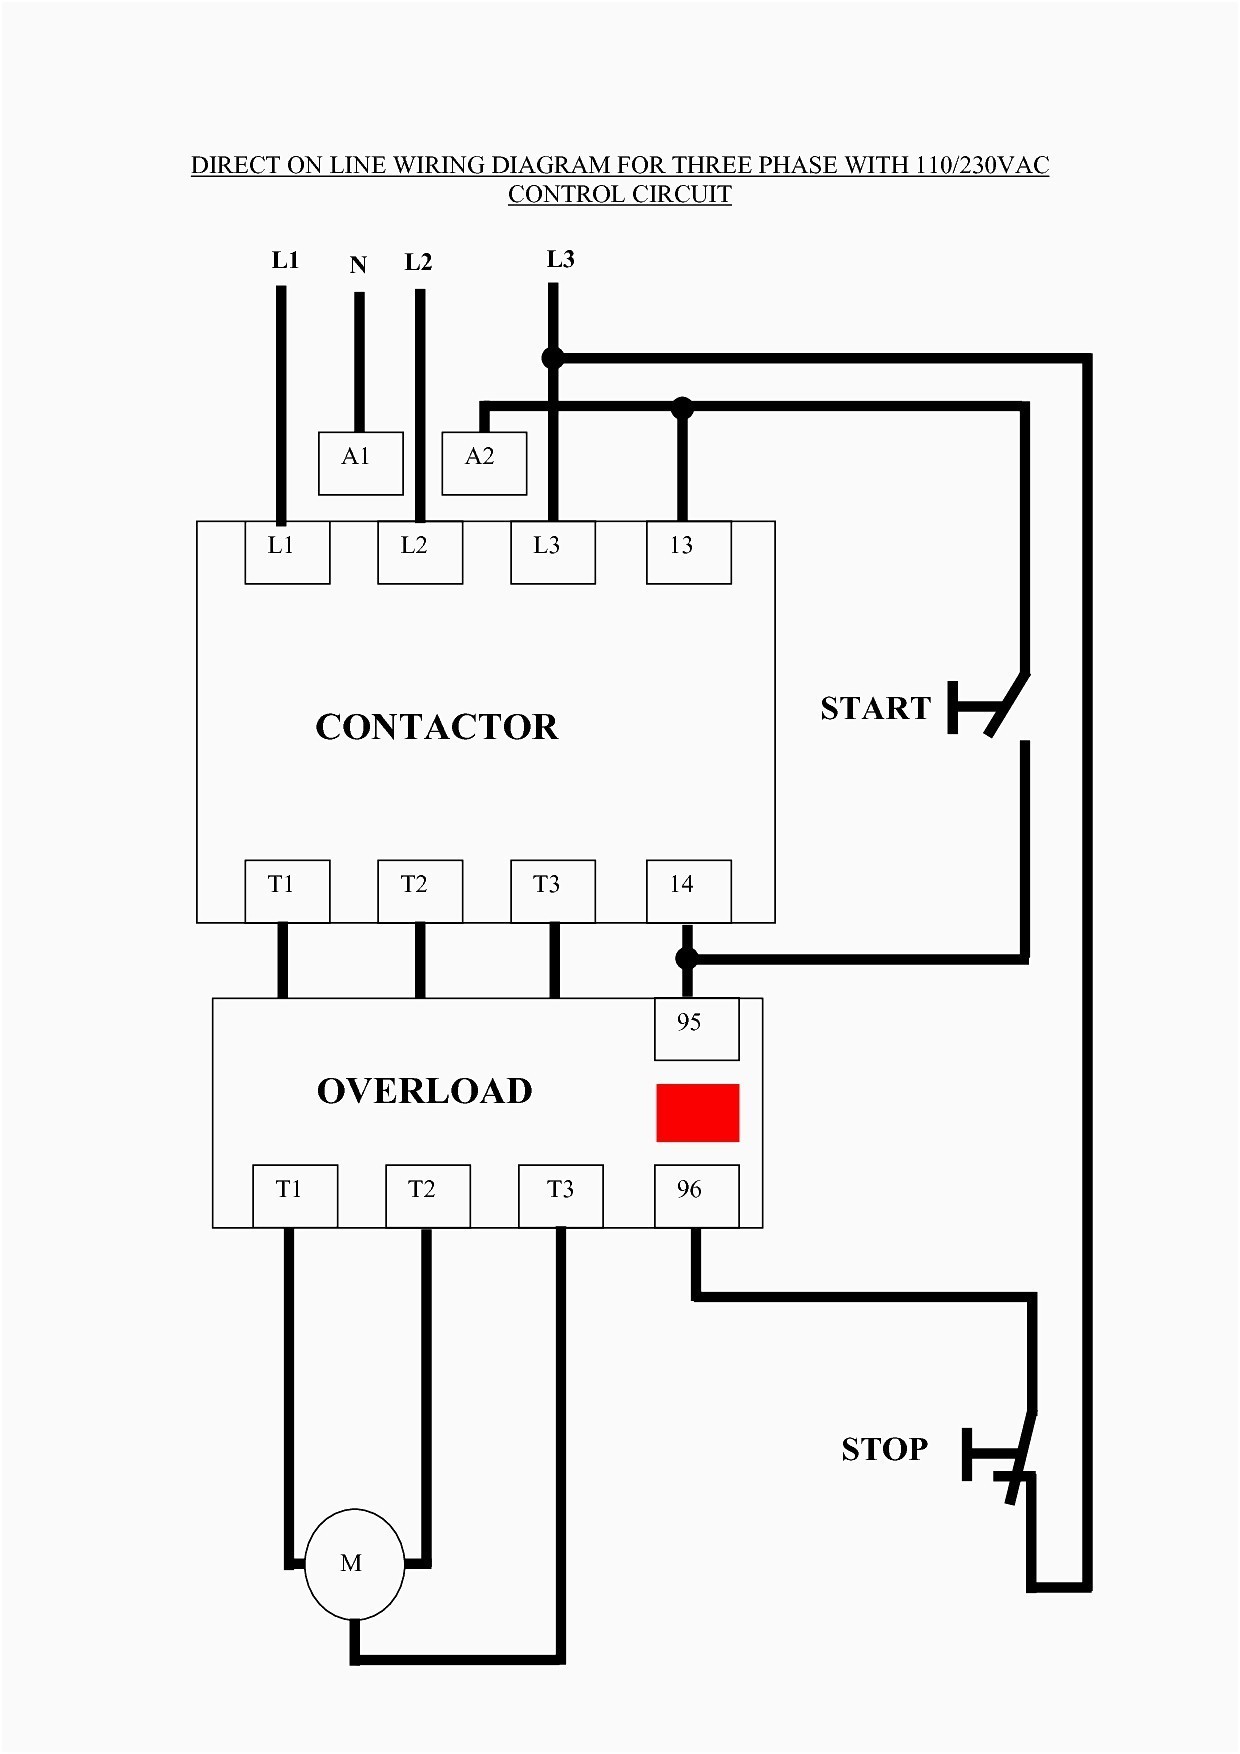 Wiring Diagram for Electrical Contactor Save Circuit Diagram Contactor New Circuit Diagram Contactor Relay